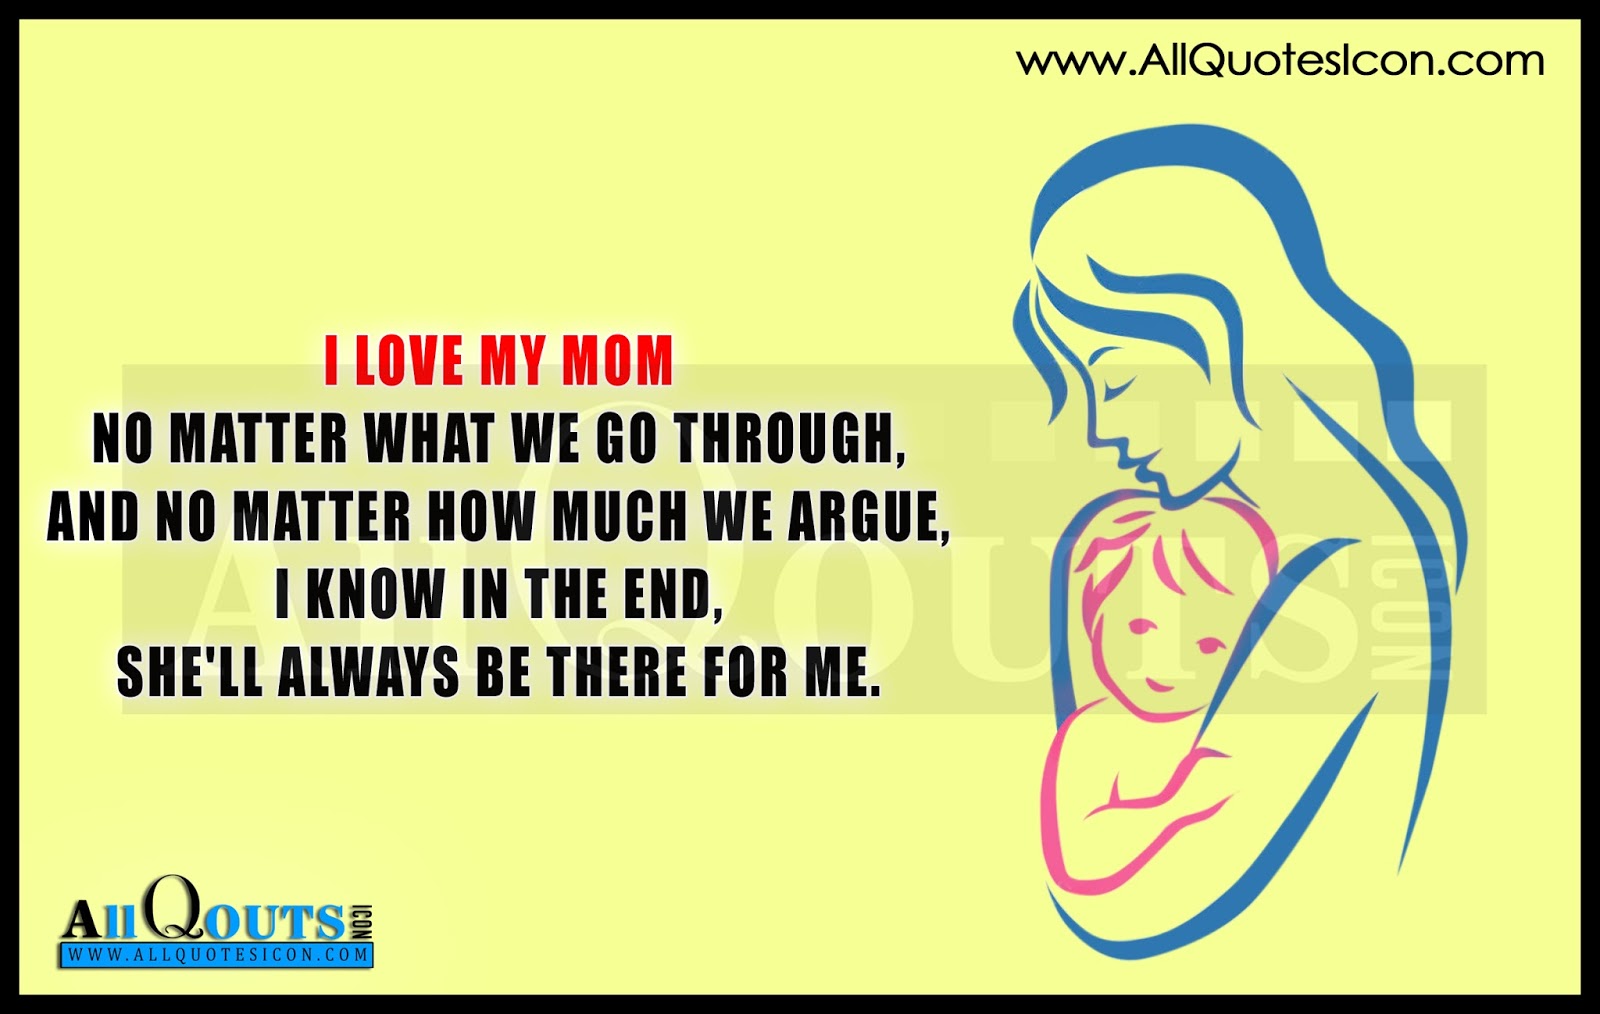 I Love You Mom Images English Quotes Hd Wallpapers Best Mother Quotes In English Images Www Allquotesicon Com Telugu Quotes Tamil Quotes Hindi Quotes English Quotes